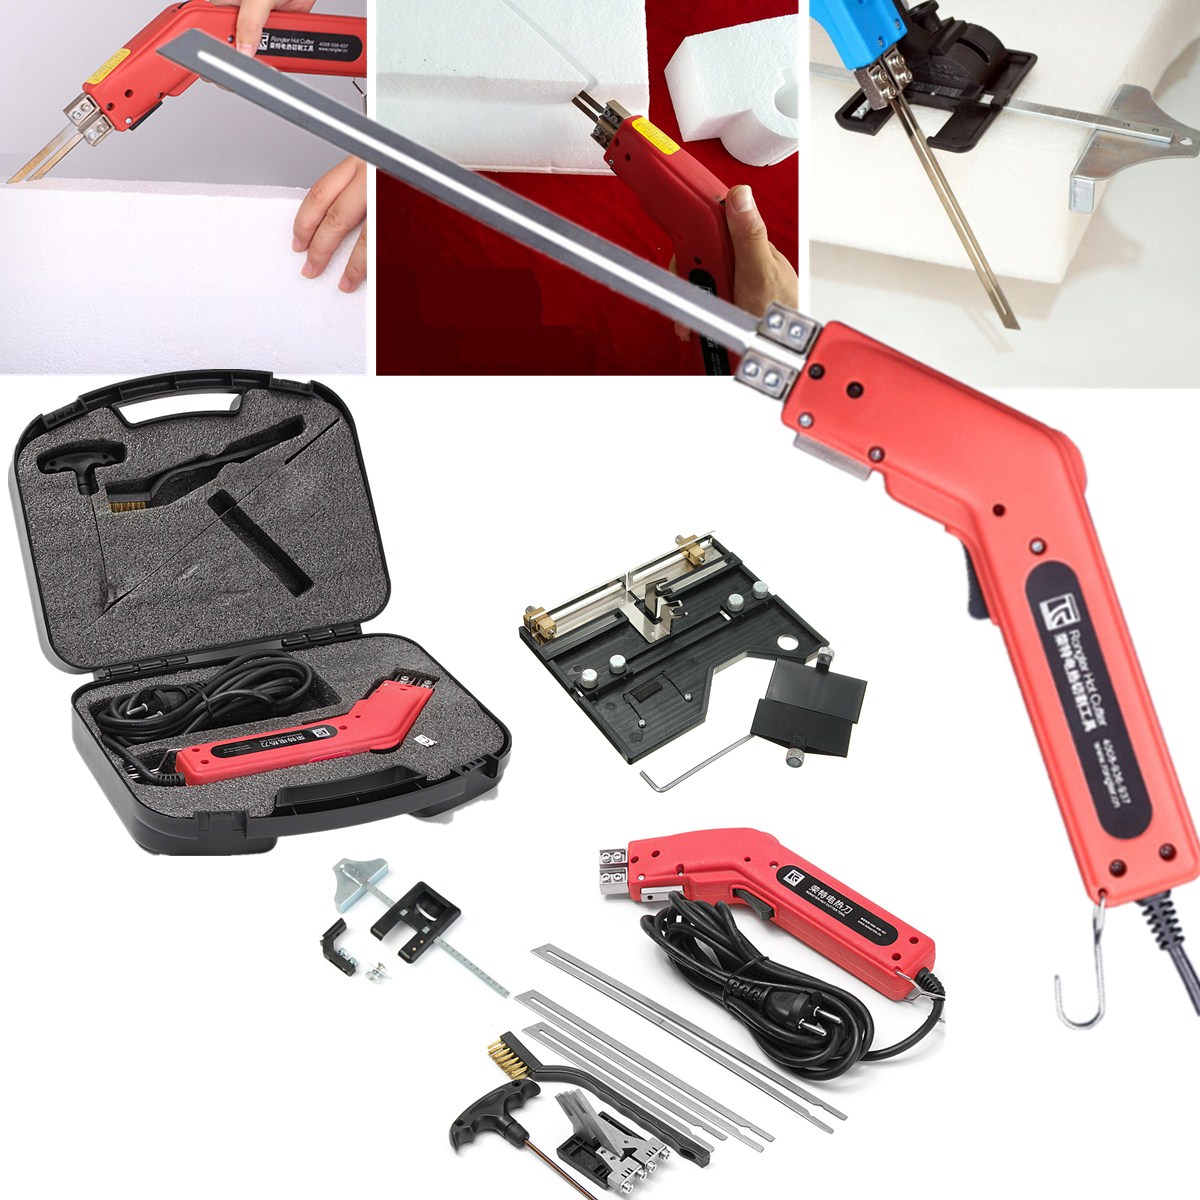 250W-220V-Nordstrand-Pro-Electric-Hot-Knife-Styrofoam-Foam-Cutter-Tool-with-Blades-Accessories-1297210-2